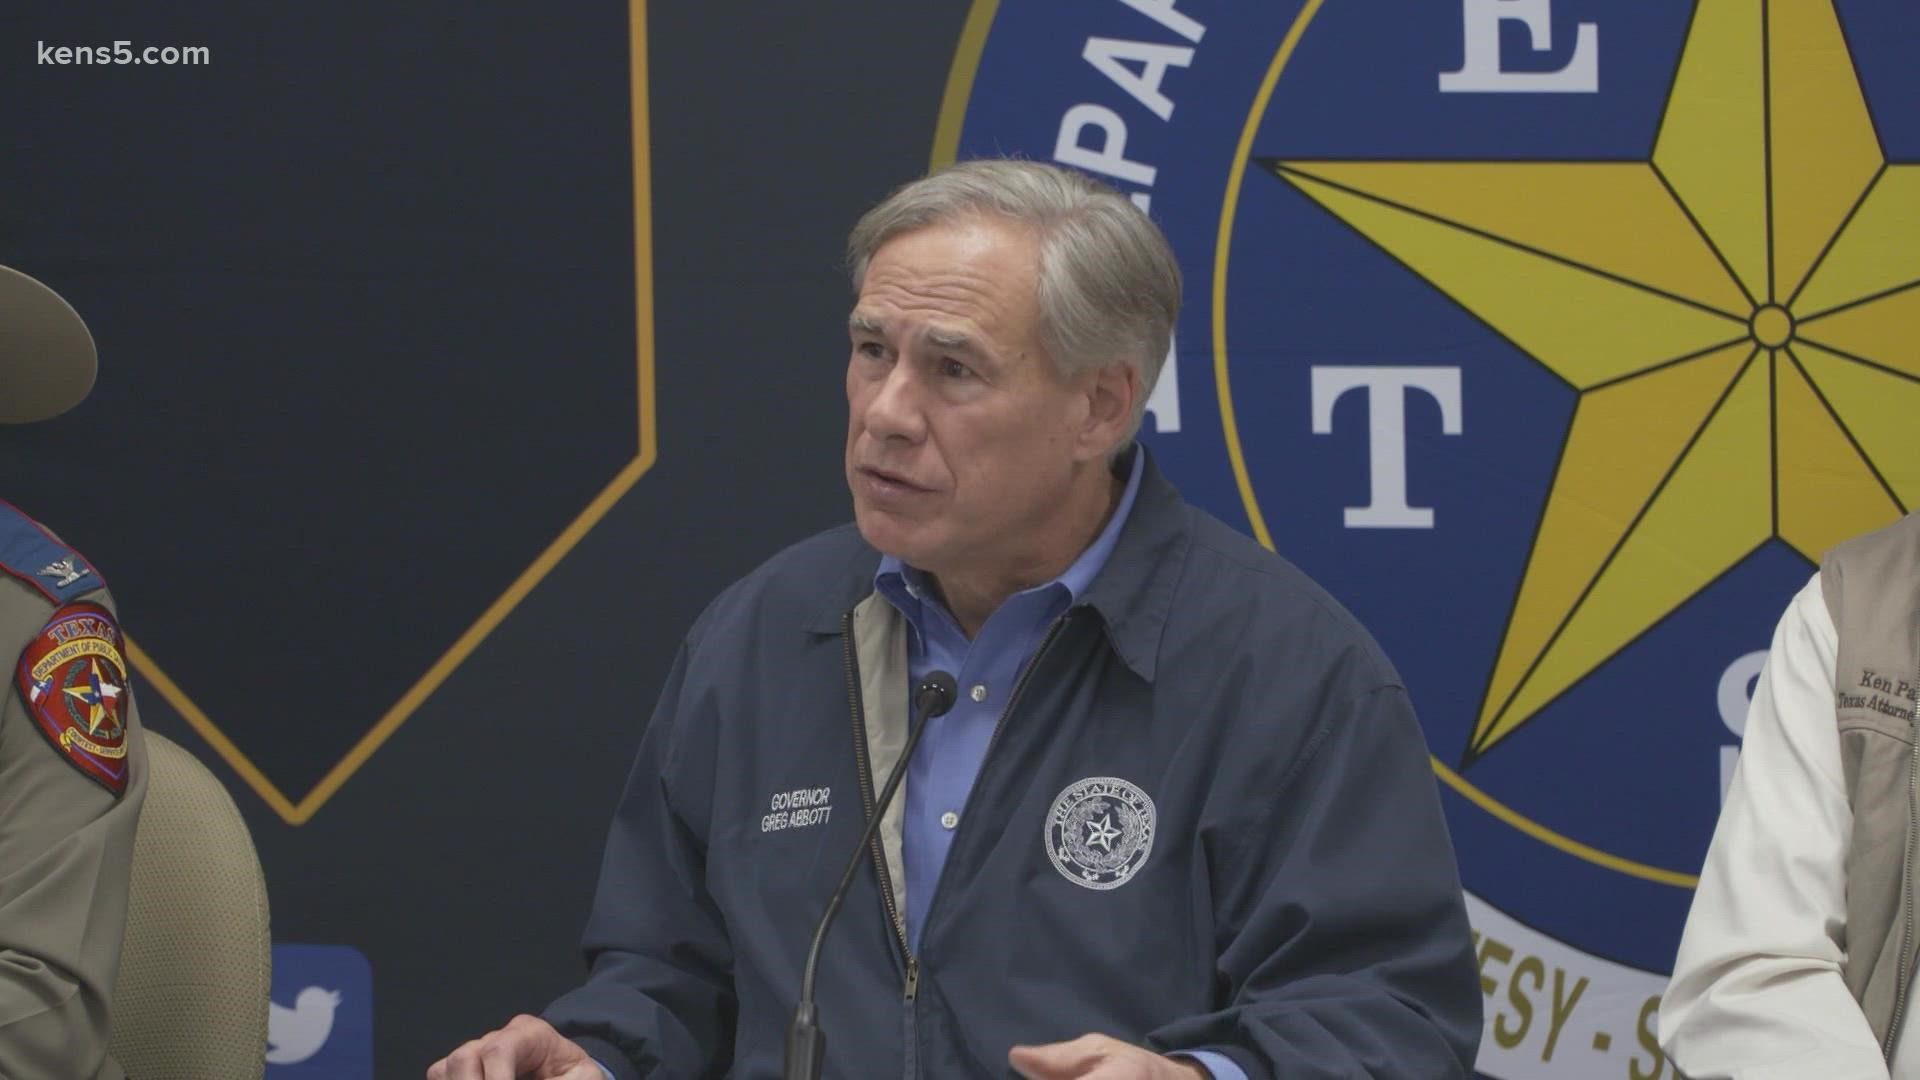 Officials from multiple counties met up with Gov. Abbott to discuss the various issues they are having surrounding migrants.